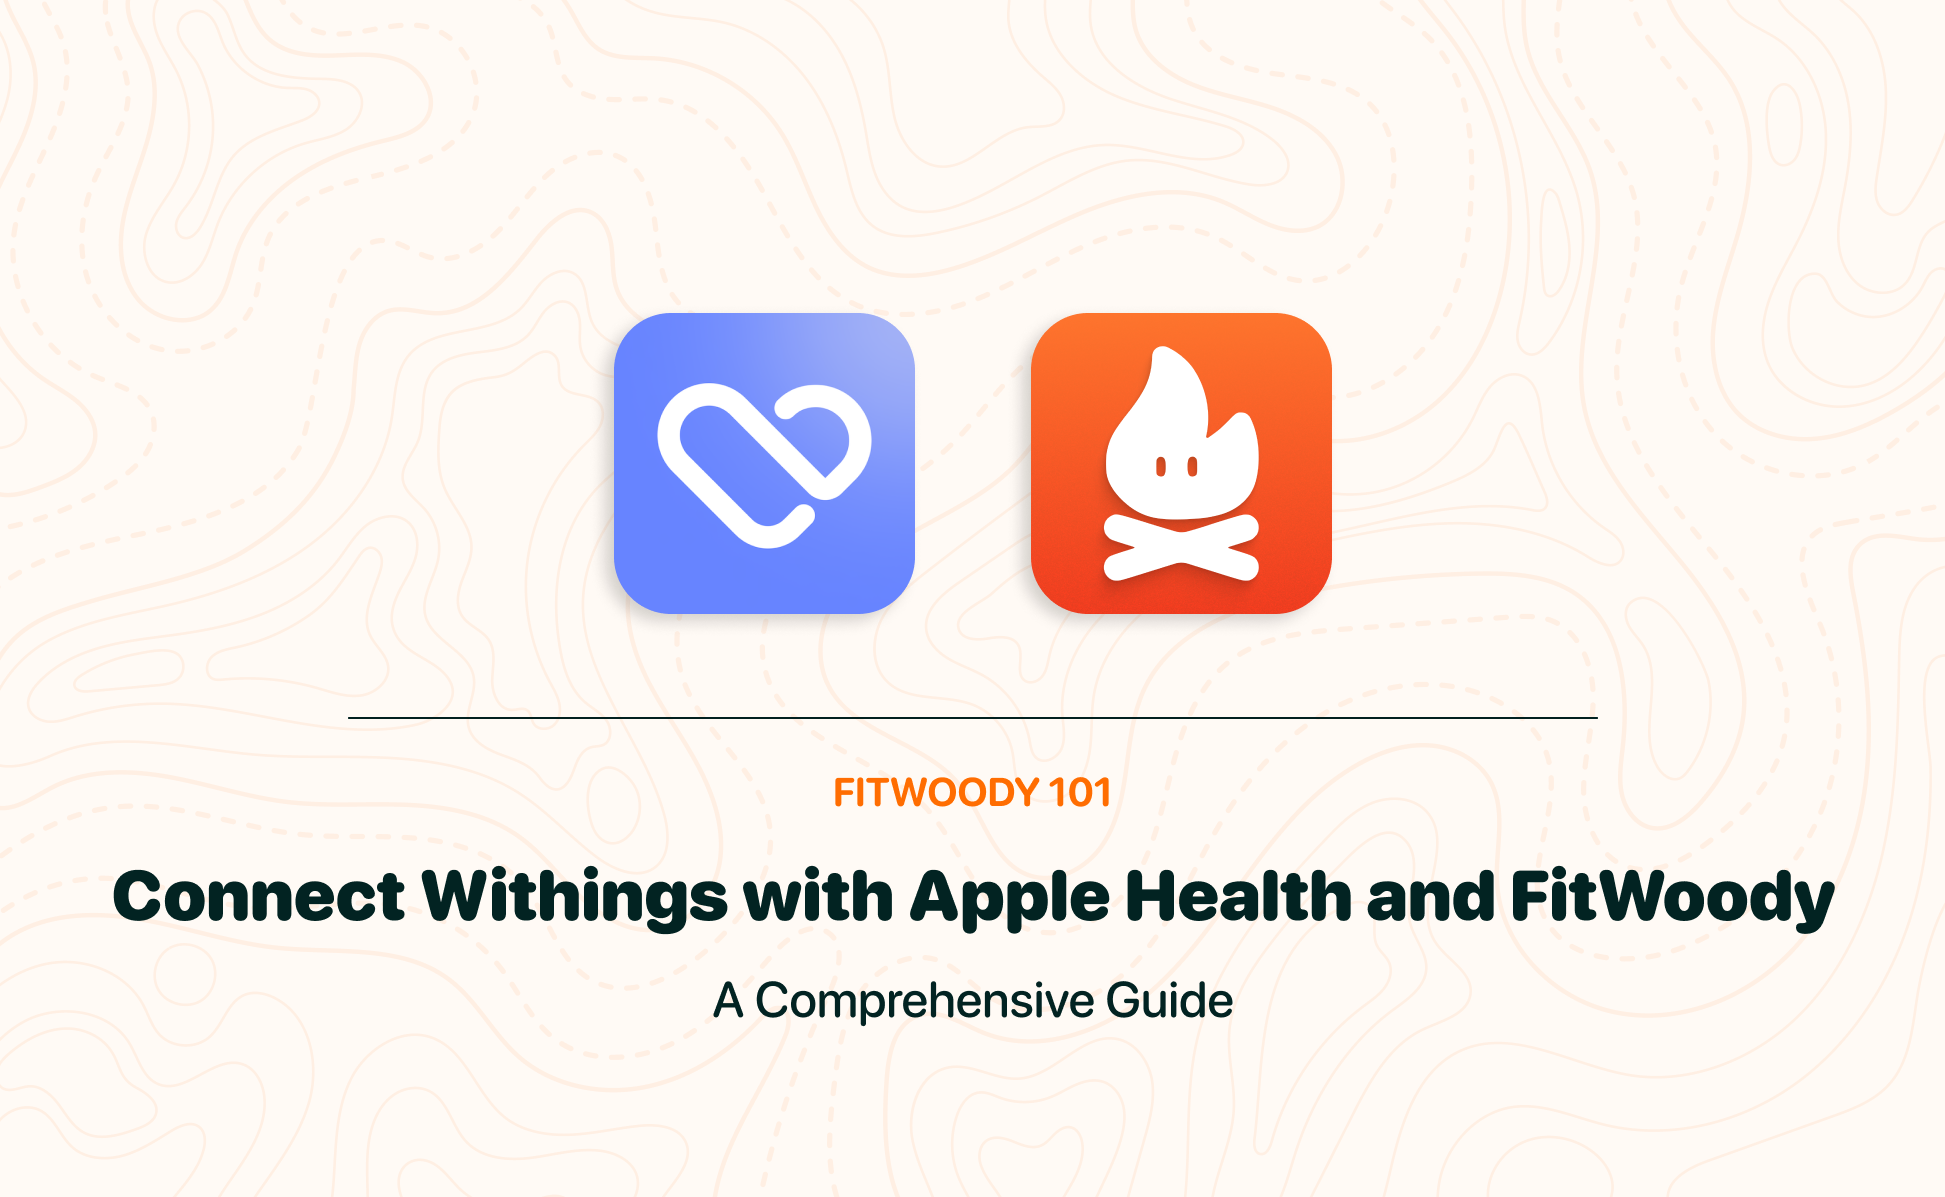 Connect Withings Health Mate with Apple Health and FitWoody